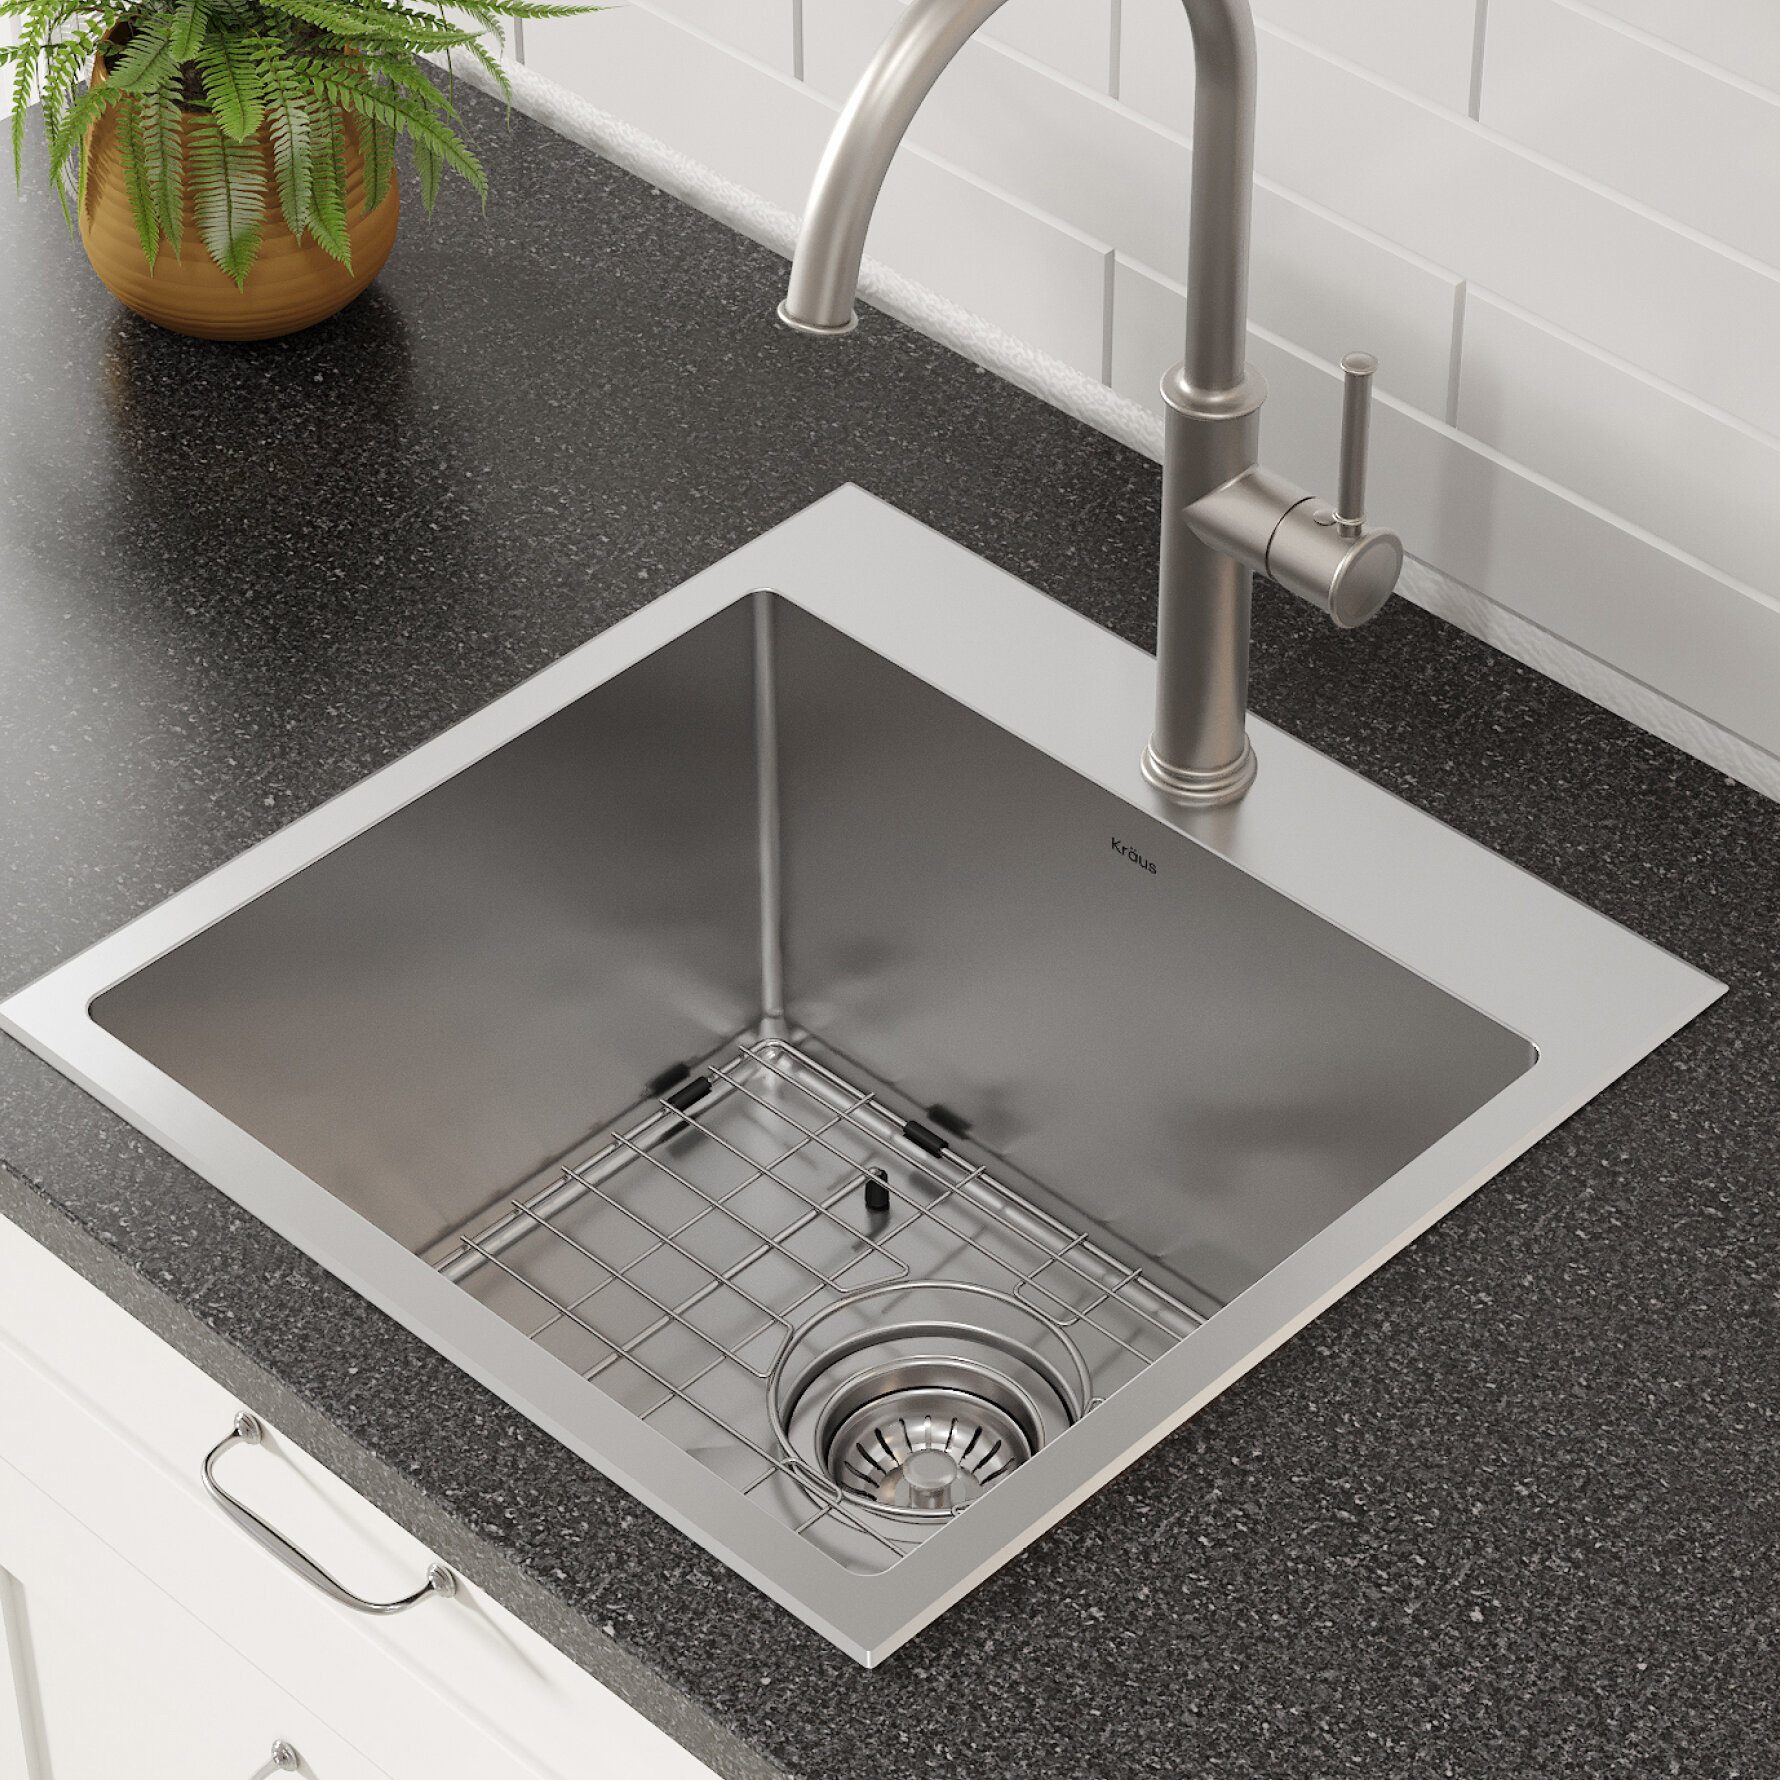 Standart Pro 16 Gauge 18 X 18 Drop In Kitchen Sink With Bottom Grid Drain Assembly And Drain Cap